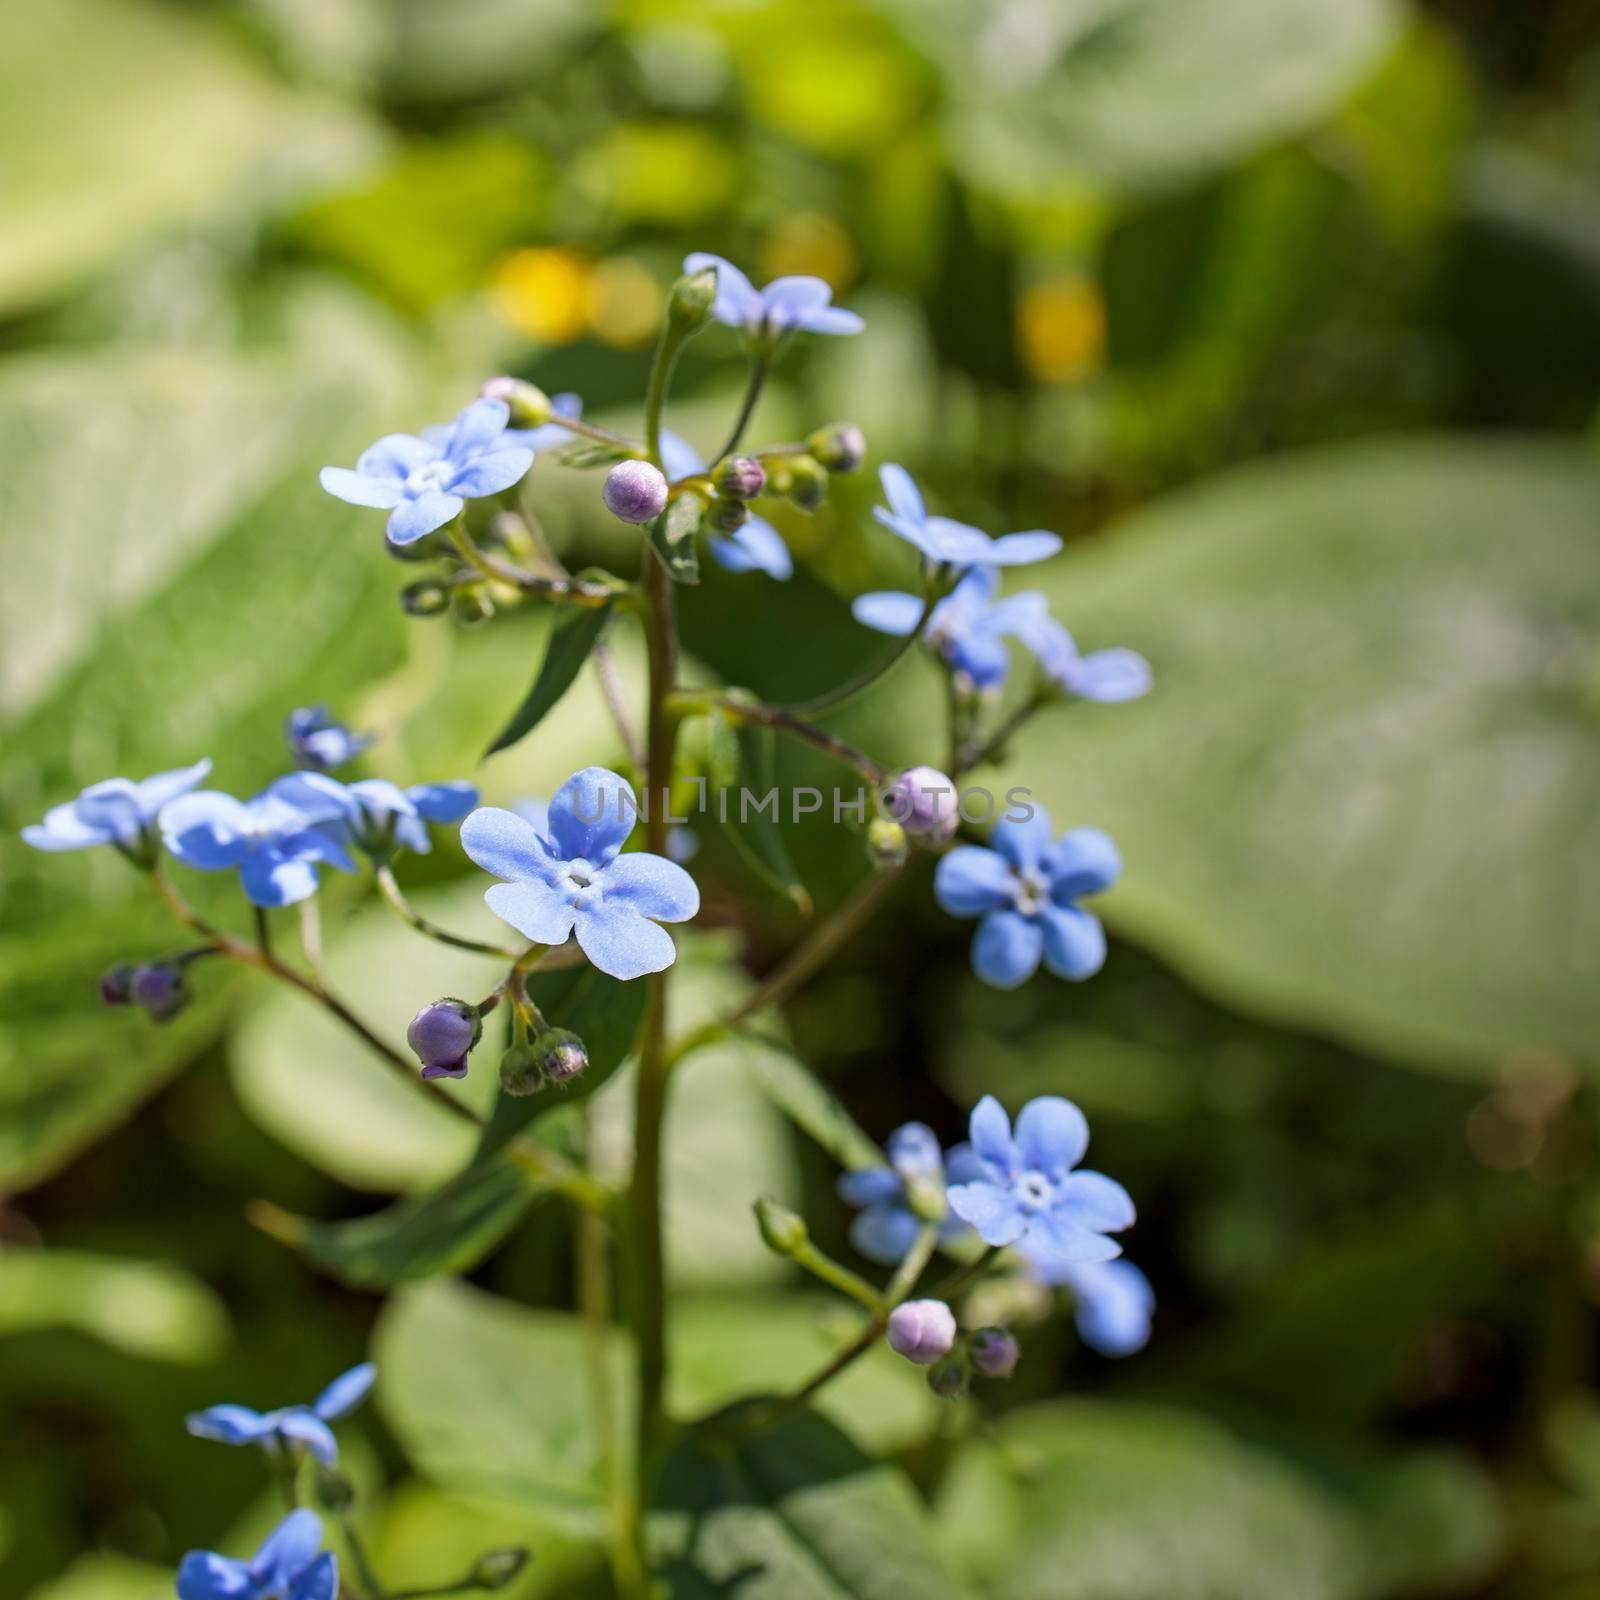 Brunnera macrophylla, the Siberian bugloss, great forget-me-not, largeleaf brunnera or heartleaf, is a species of flowering plant in the family Boraginaceae, native to the Caucasus.